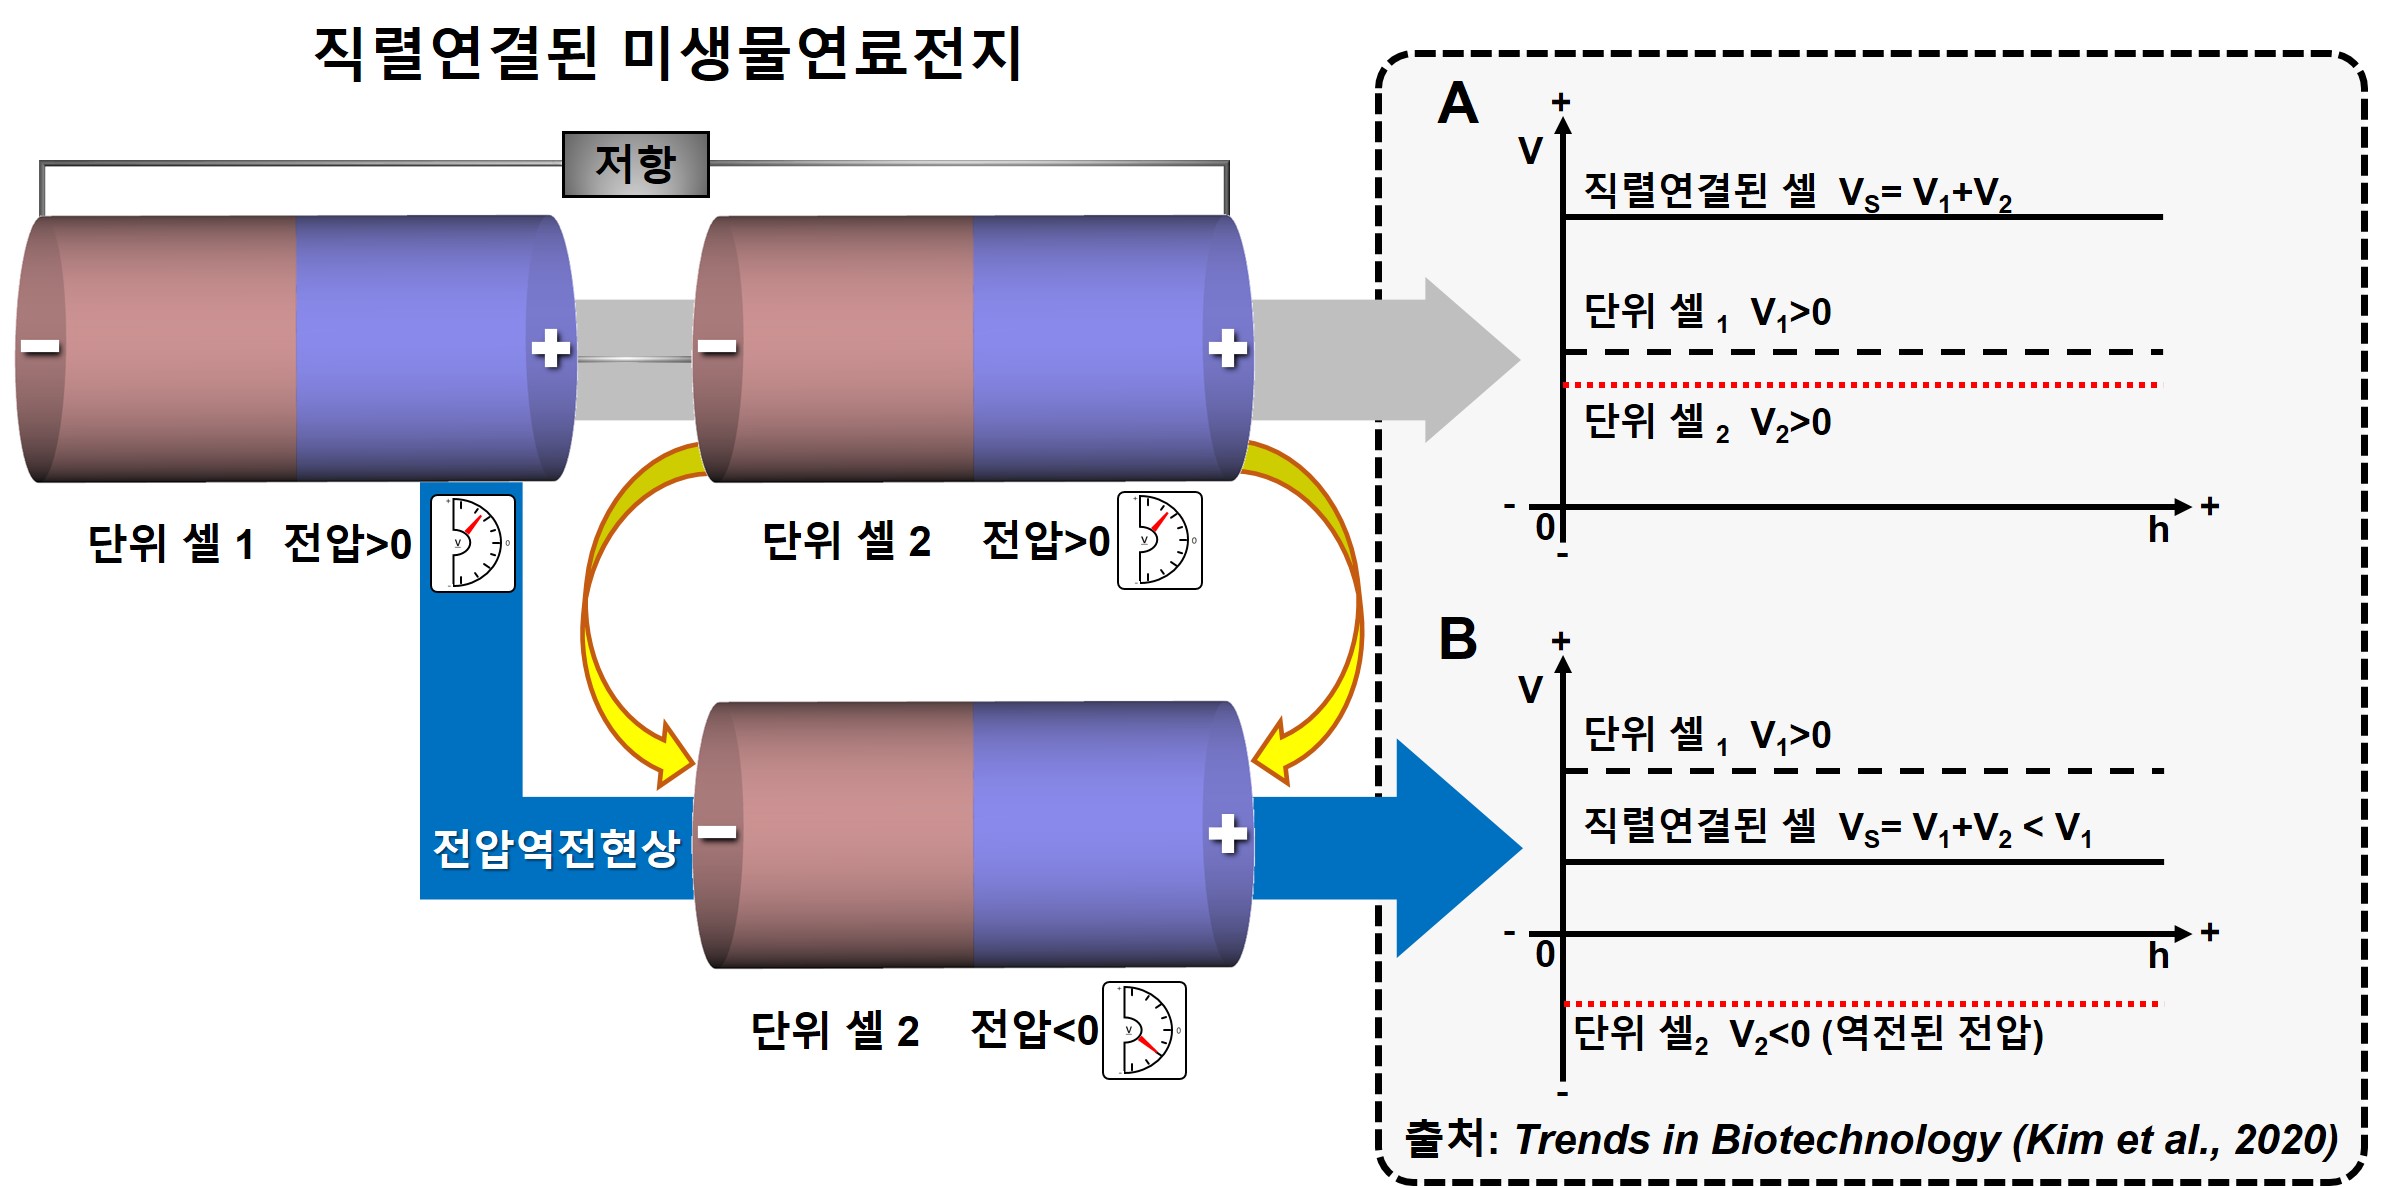 Professor In Seop Chang's research team suggests a way to overcome the challenges of commercializing microbial fuel cells (National Research Foundation of Korea) 이미지